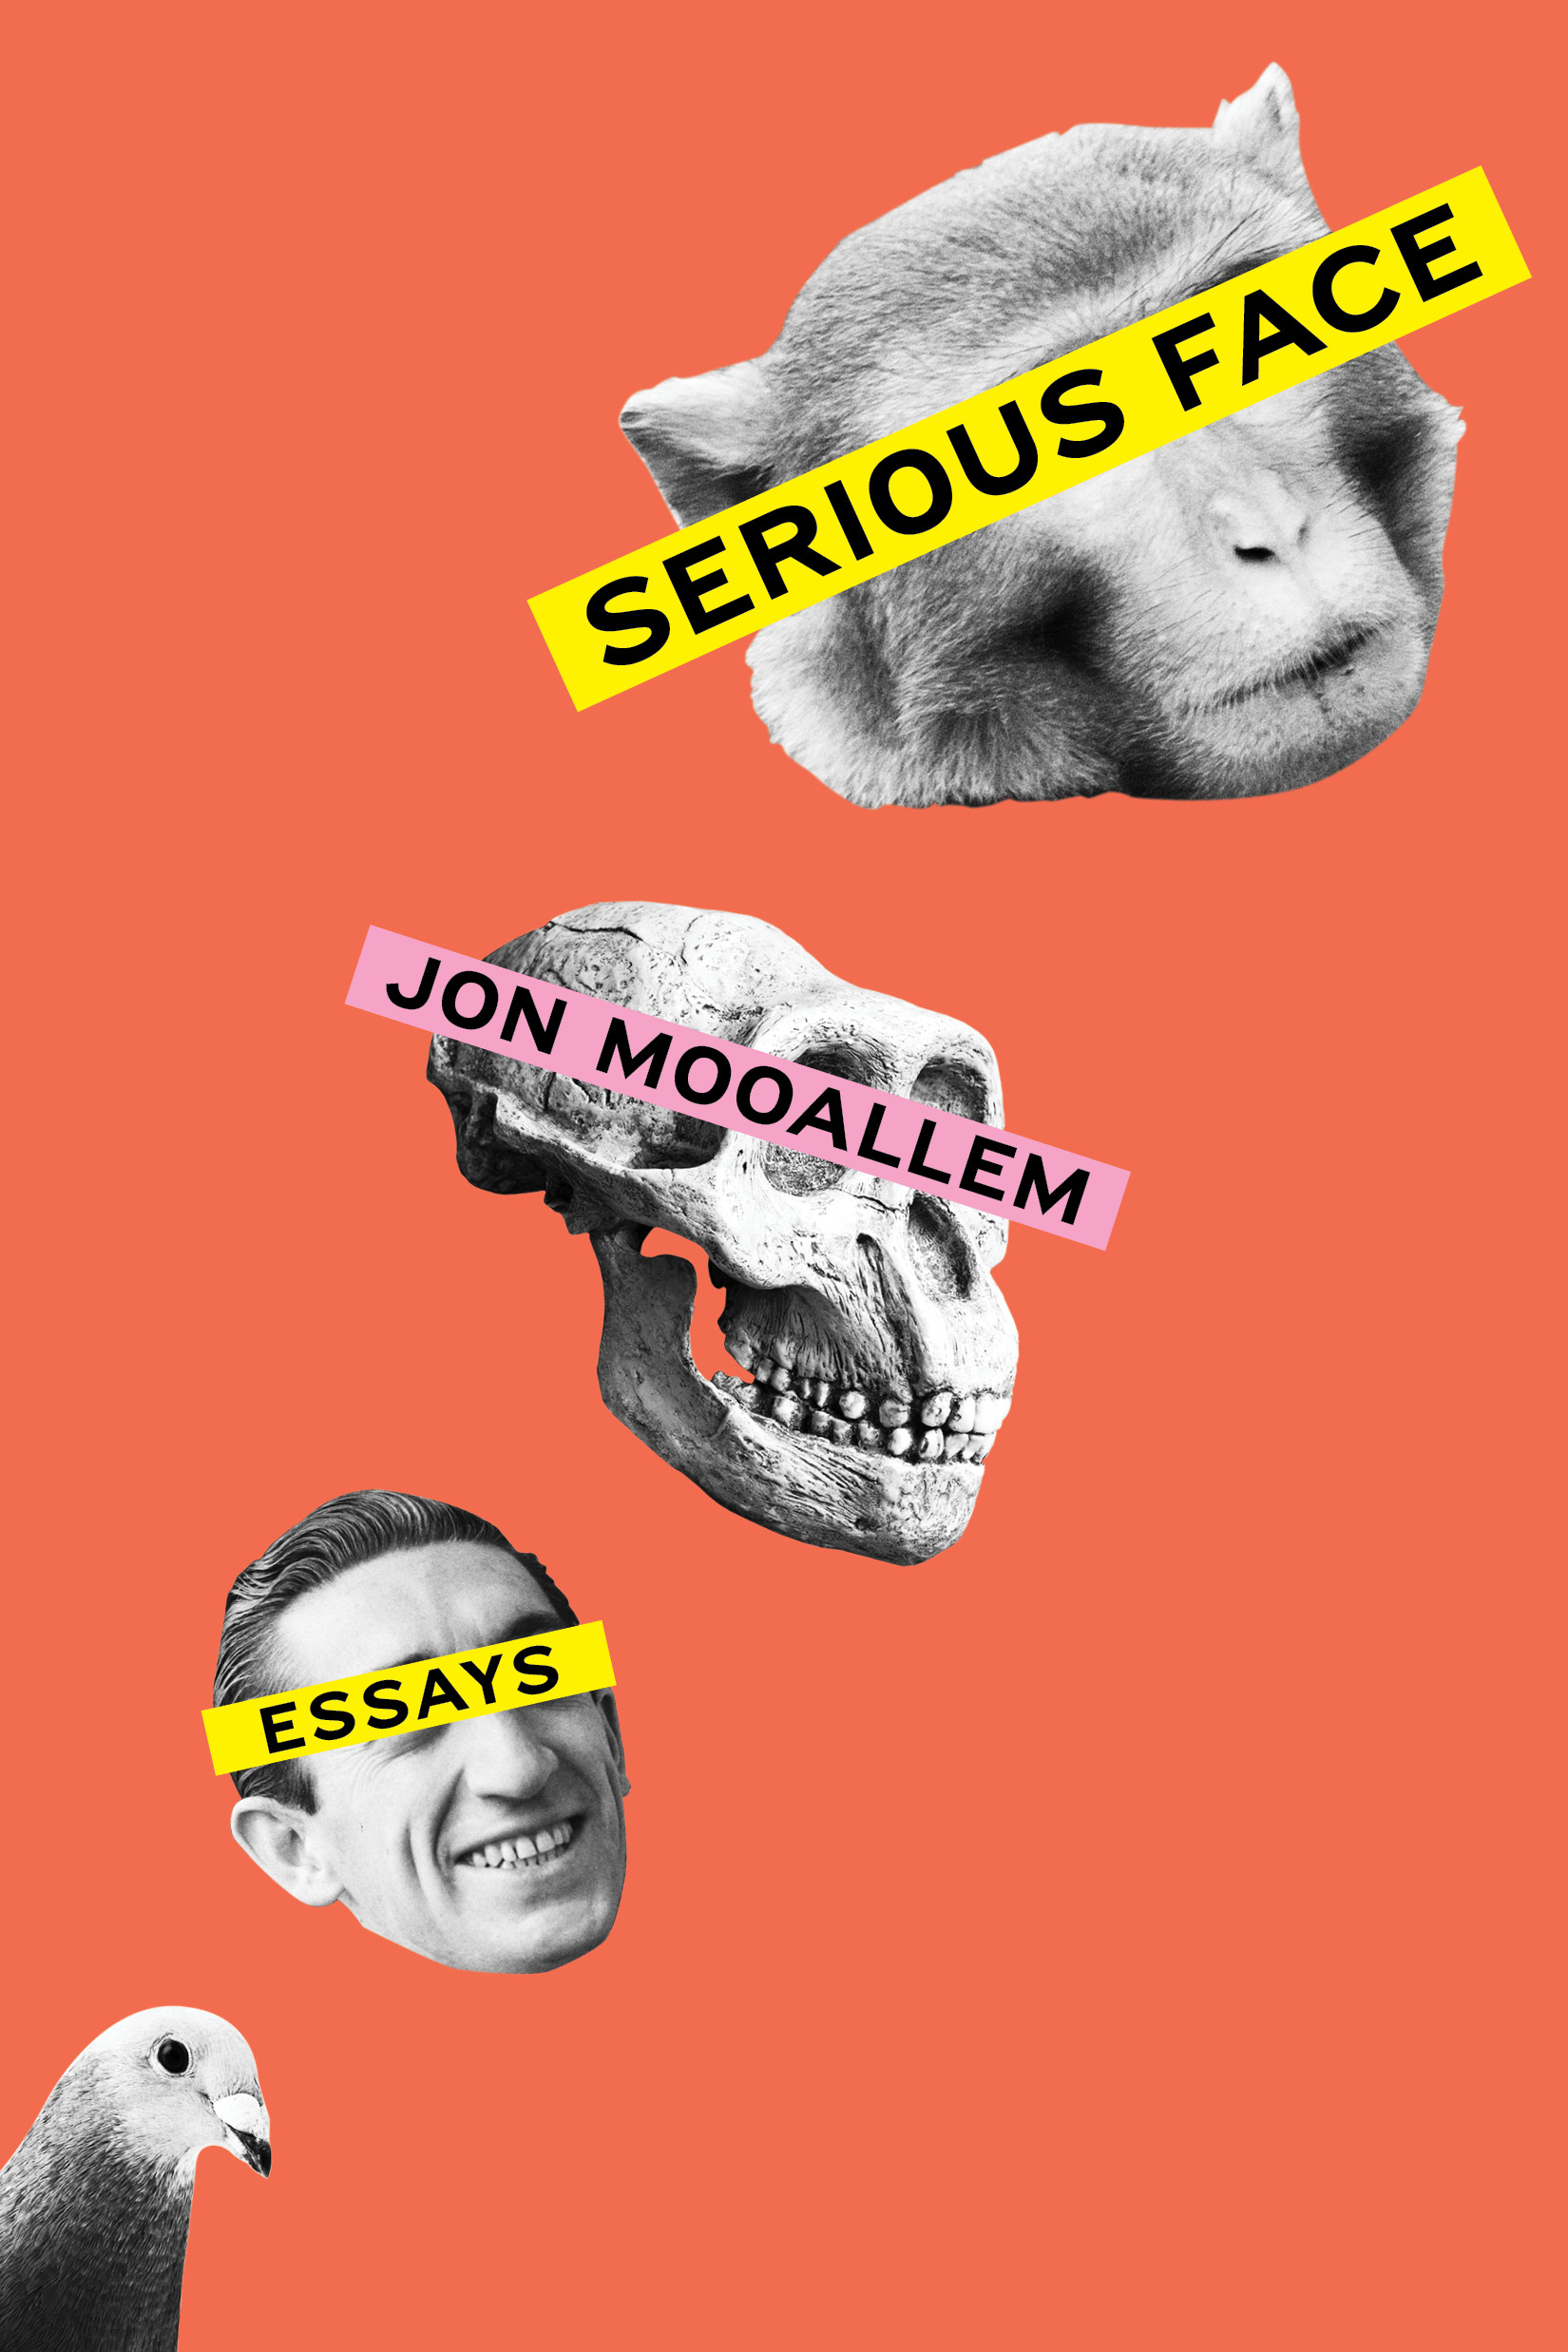 Book Launch: Serious Face by Jon Mooallem, in conversation with Isaac Fitzgerald